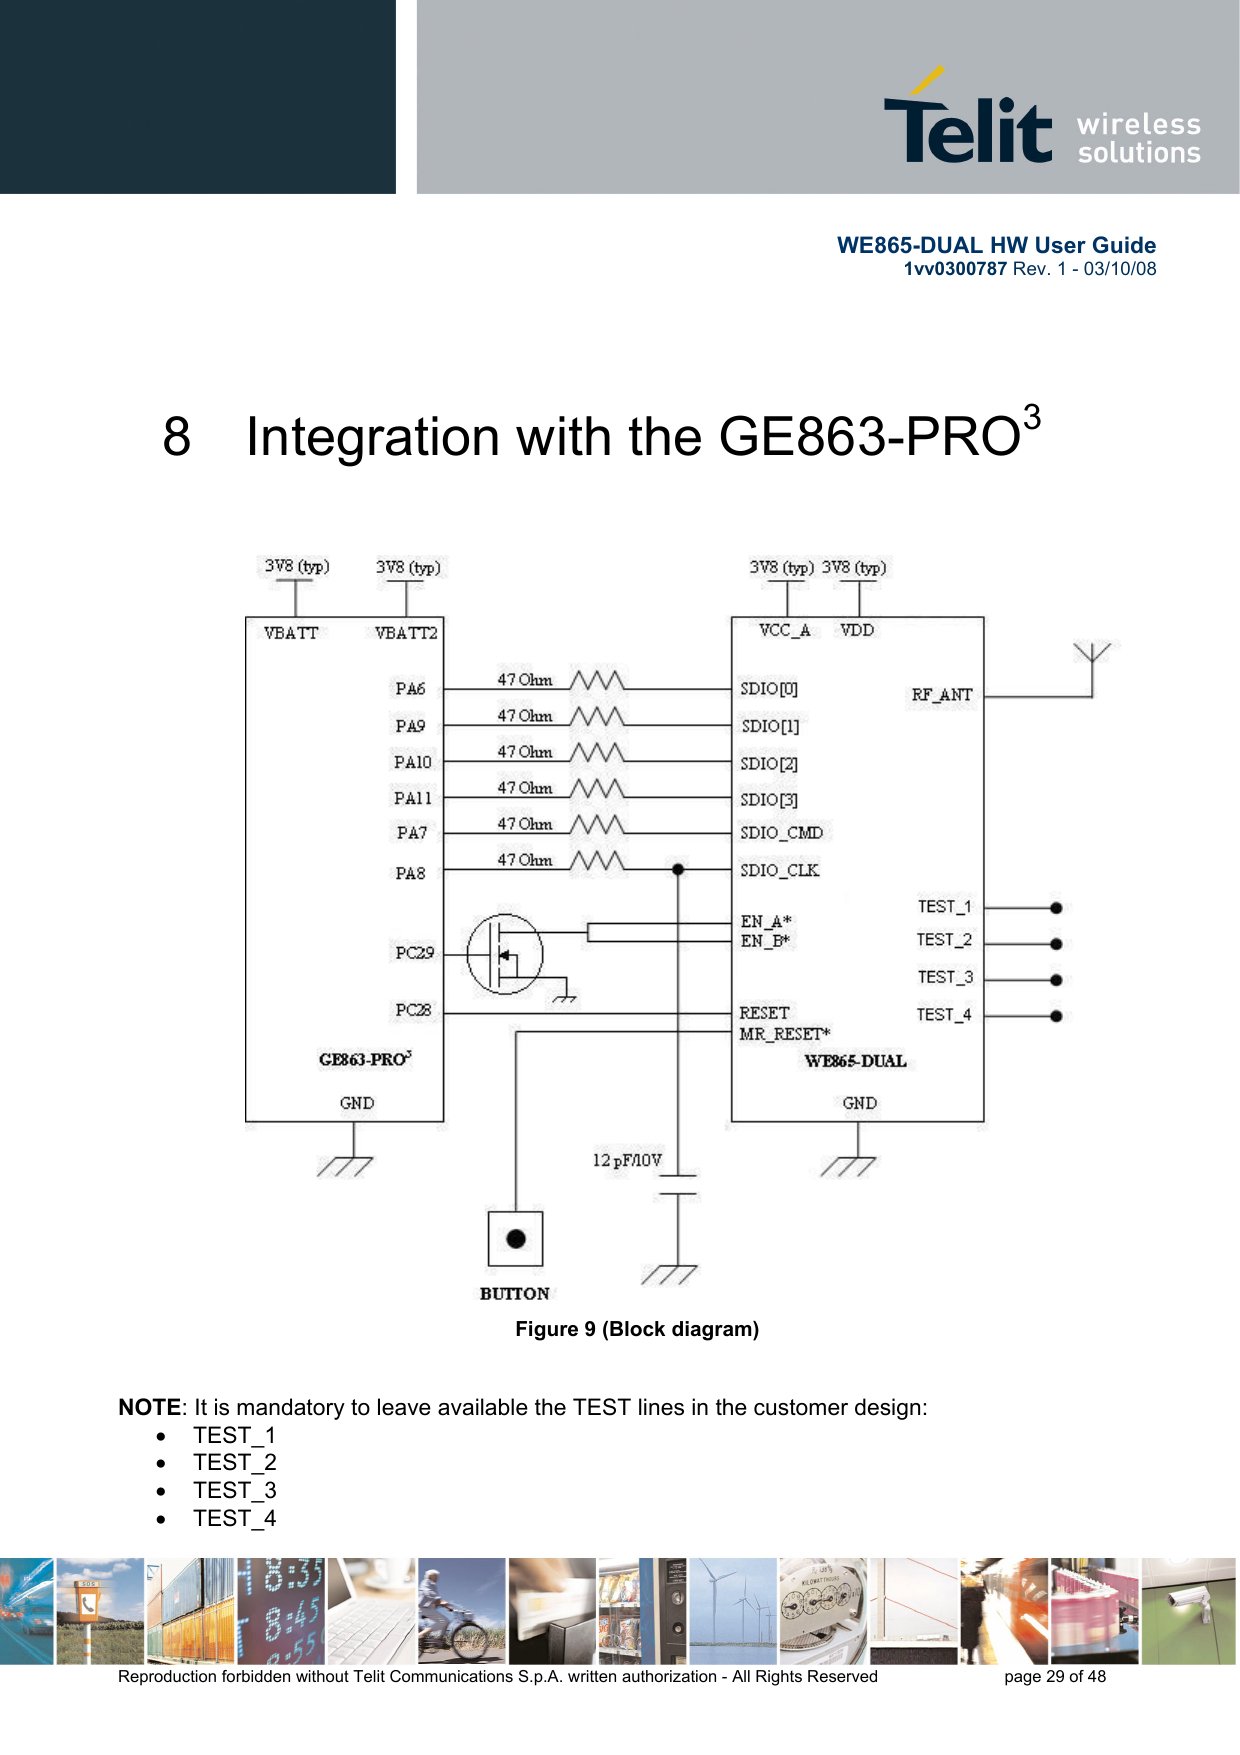       WE865-DUAL HW User Guide 1vv0300787 Rev. 1 - 03/10/08      Reproduction forbidden without Telit Communications S.p.A. written authorization - All Rights Reserved    page 29 of 48  8  Integration with the GE863-PRO3                                               Figure 9 (Block diagram)                                                                                              NOTE: It is mandatory to leave available the TEST lines in the customer design: • TEST_1 • TEST_2 • TEST_3 • TEST_4 